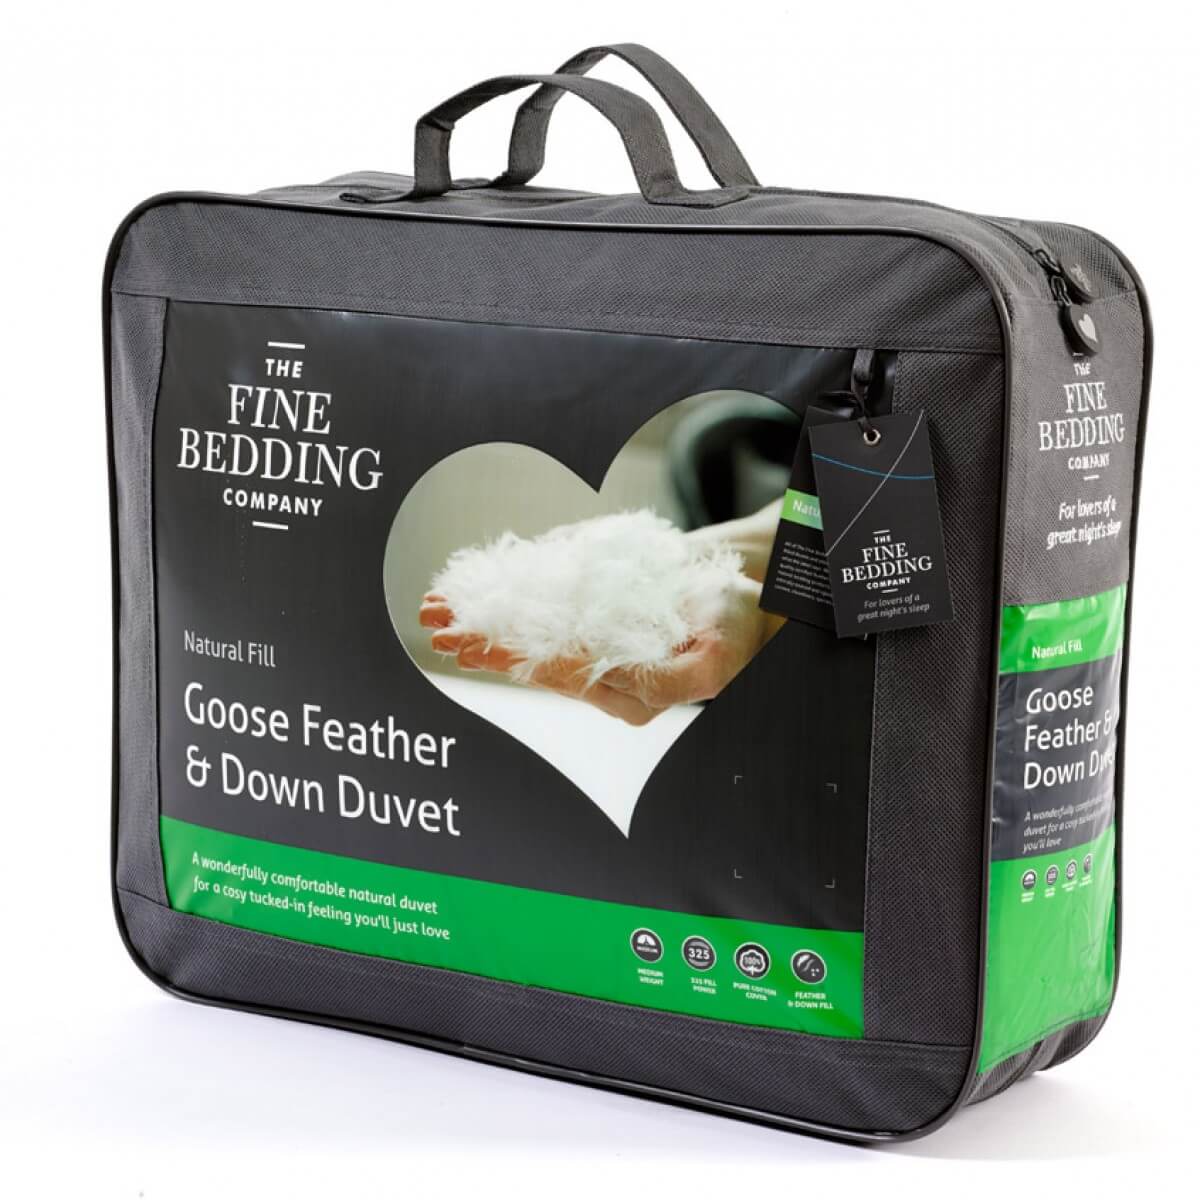 Goose Feather & Down Duvet - The Fine Bedding Company